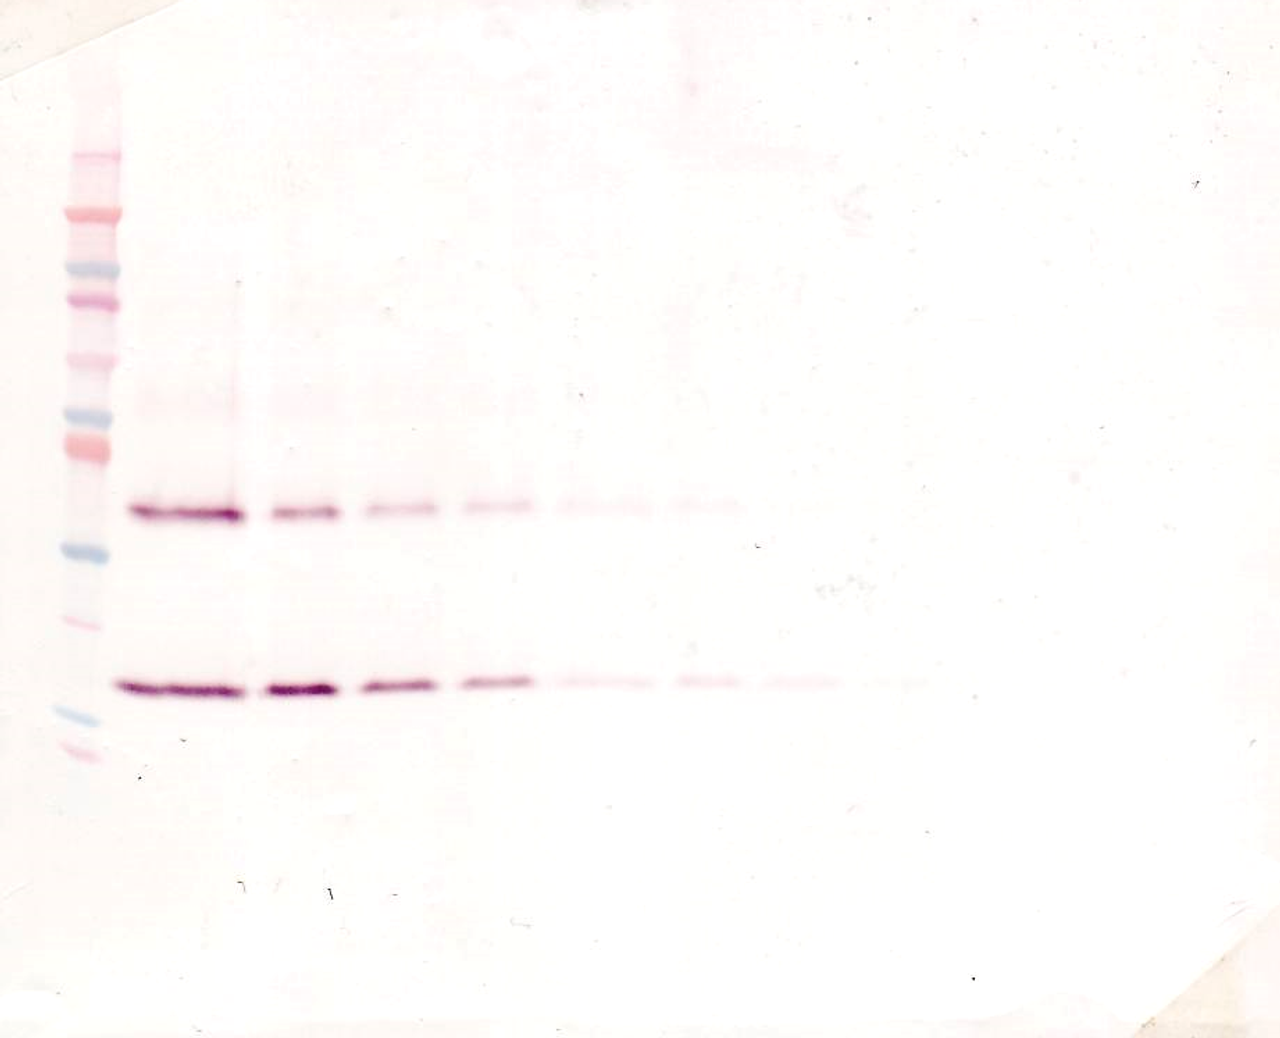 To detect Rat IL-1-beta by Western Blot analysis this antibody can be used at a concentration of 0.1 - 0.2 ug/ml. Used in conjunction with compatible secondary reagents the detection limit for recombinant Rat IL-1-beta is 1.5 - 3.0 ng/lane, under either reducing or non-reducing conditions.